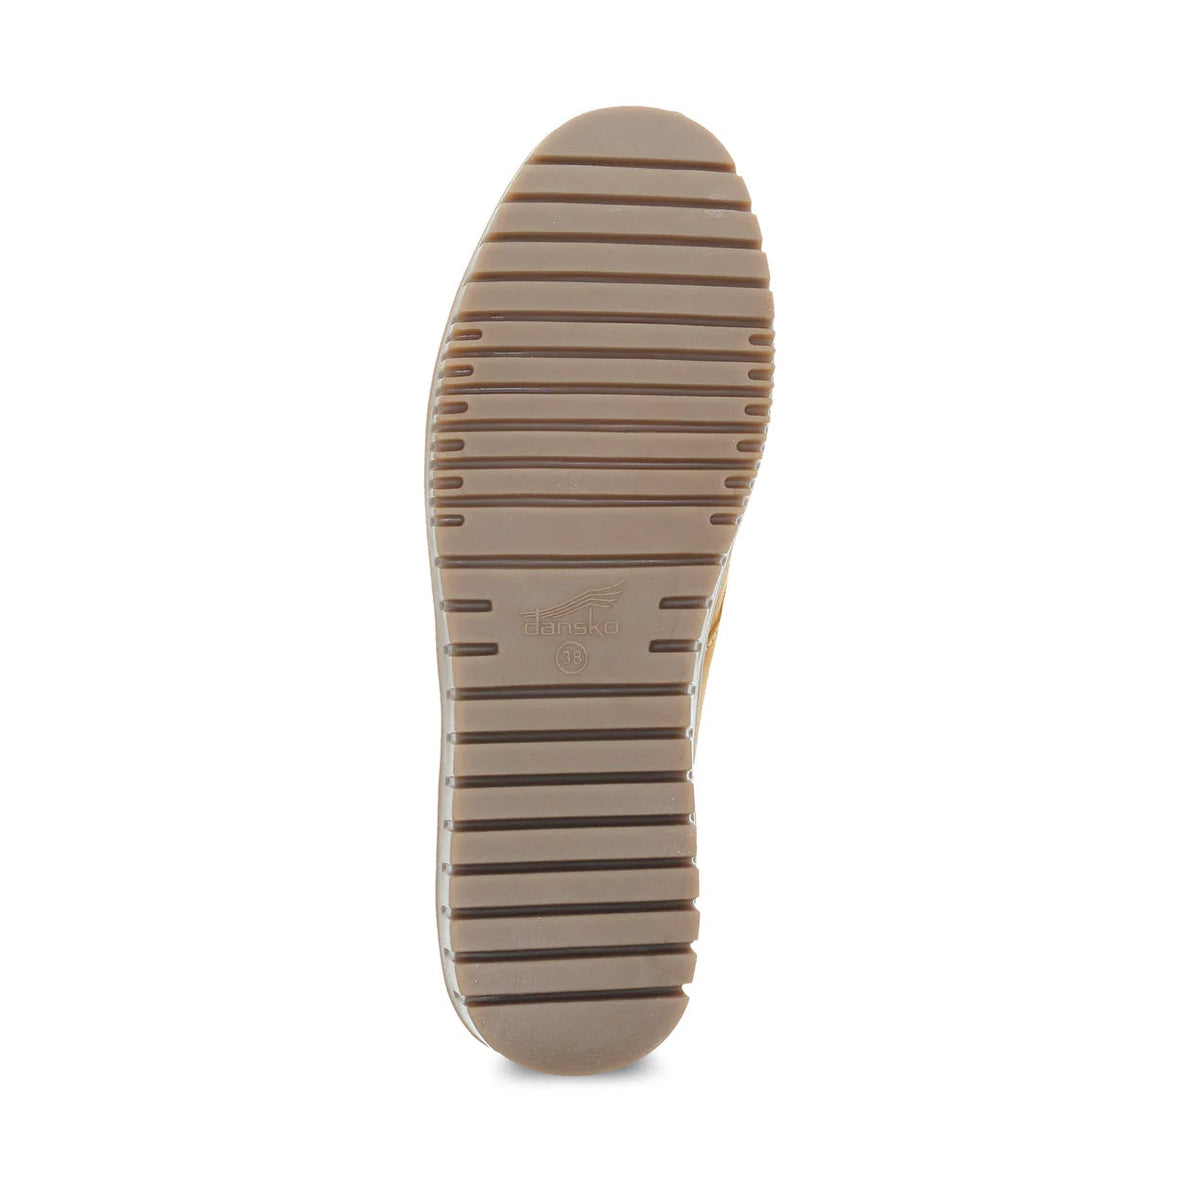 Bottom view of a brown Dansko Libbie Mustard Burnished Oxford shoe sole displaying horizontal ridges and the brand name &quot;Dansko&quot; embossed in the center, featuring Dansko Natural Arch technology.